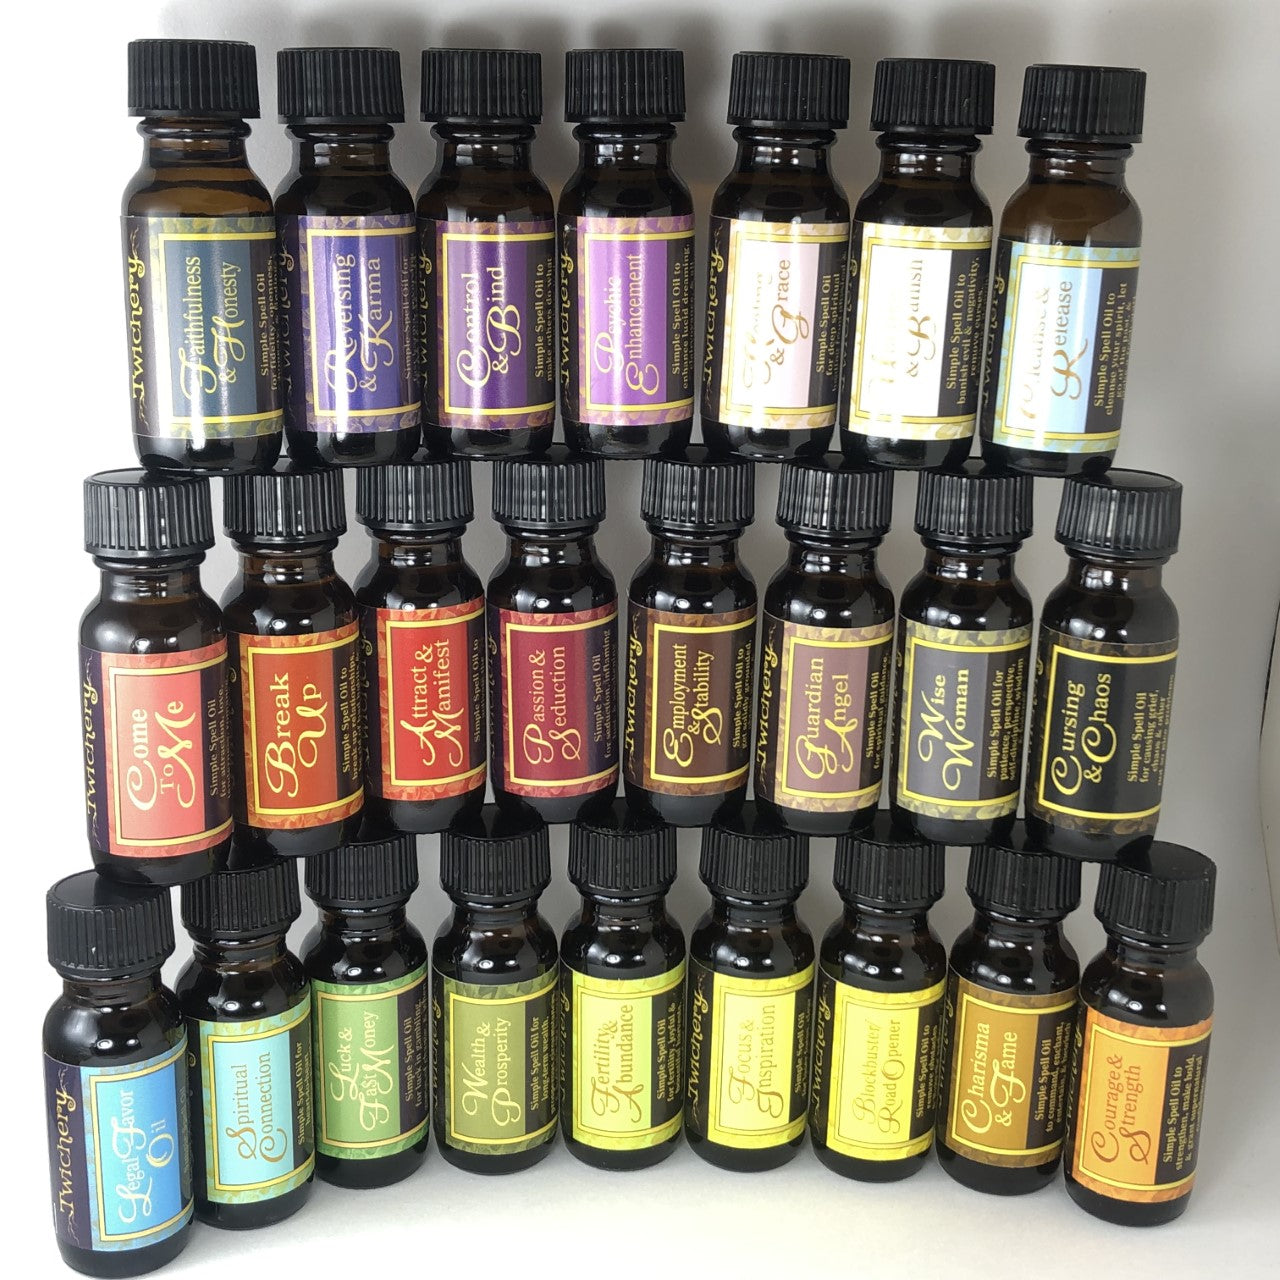 Twichery Quikspell Oils for clear thinking and mental acuity. Beautifully collectible! Focus & Inspiration pictured with all other Twichery Quikspell Oils! Hoodoo, Voodoo, Wicca, Pagan